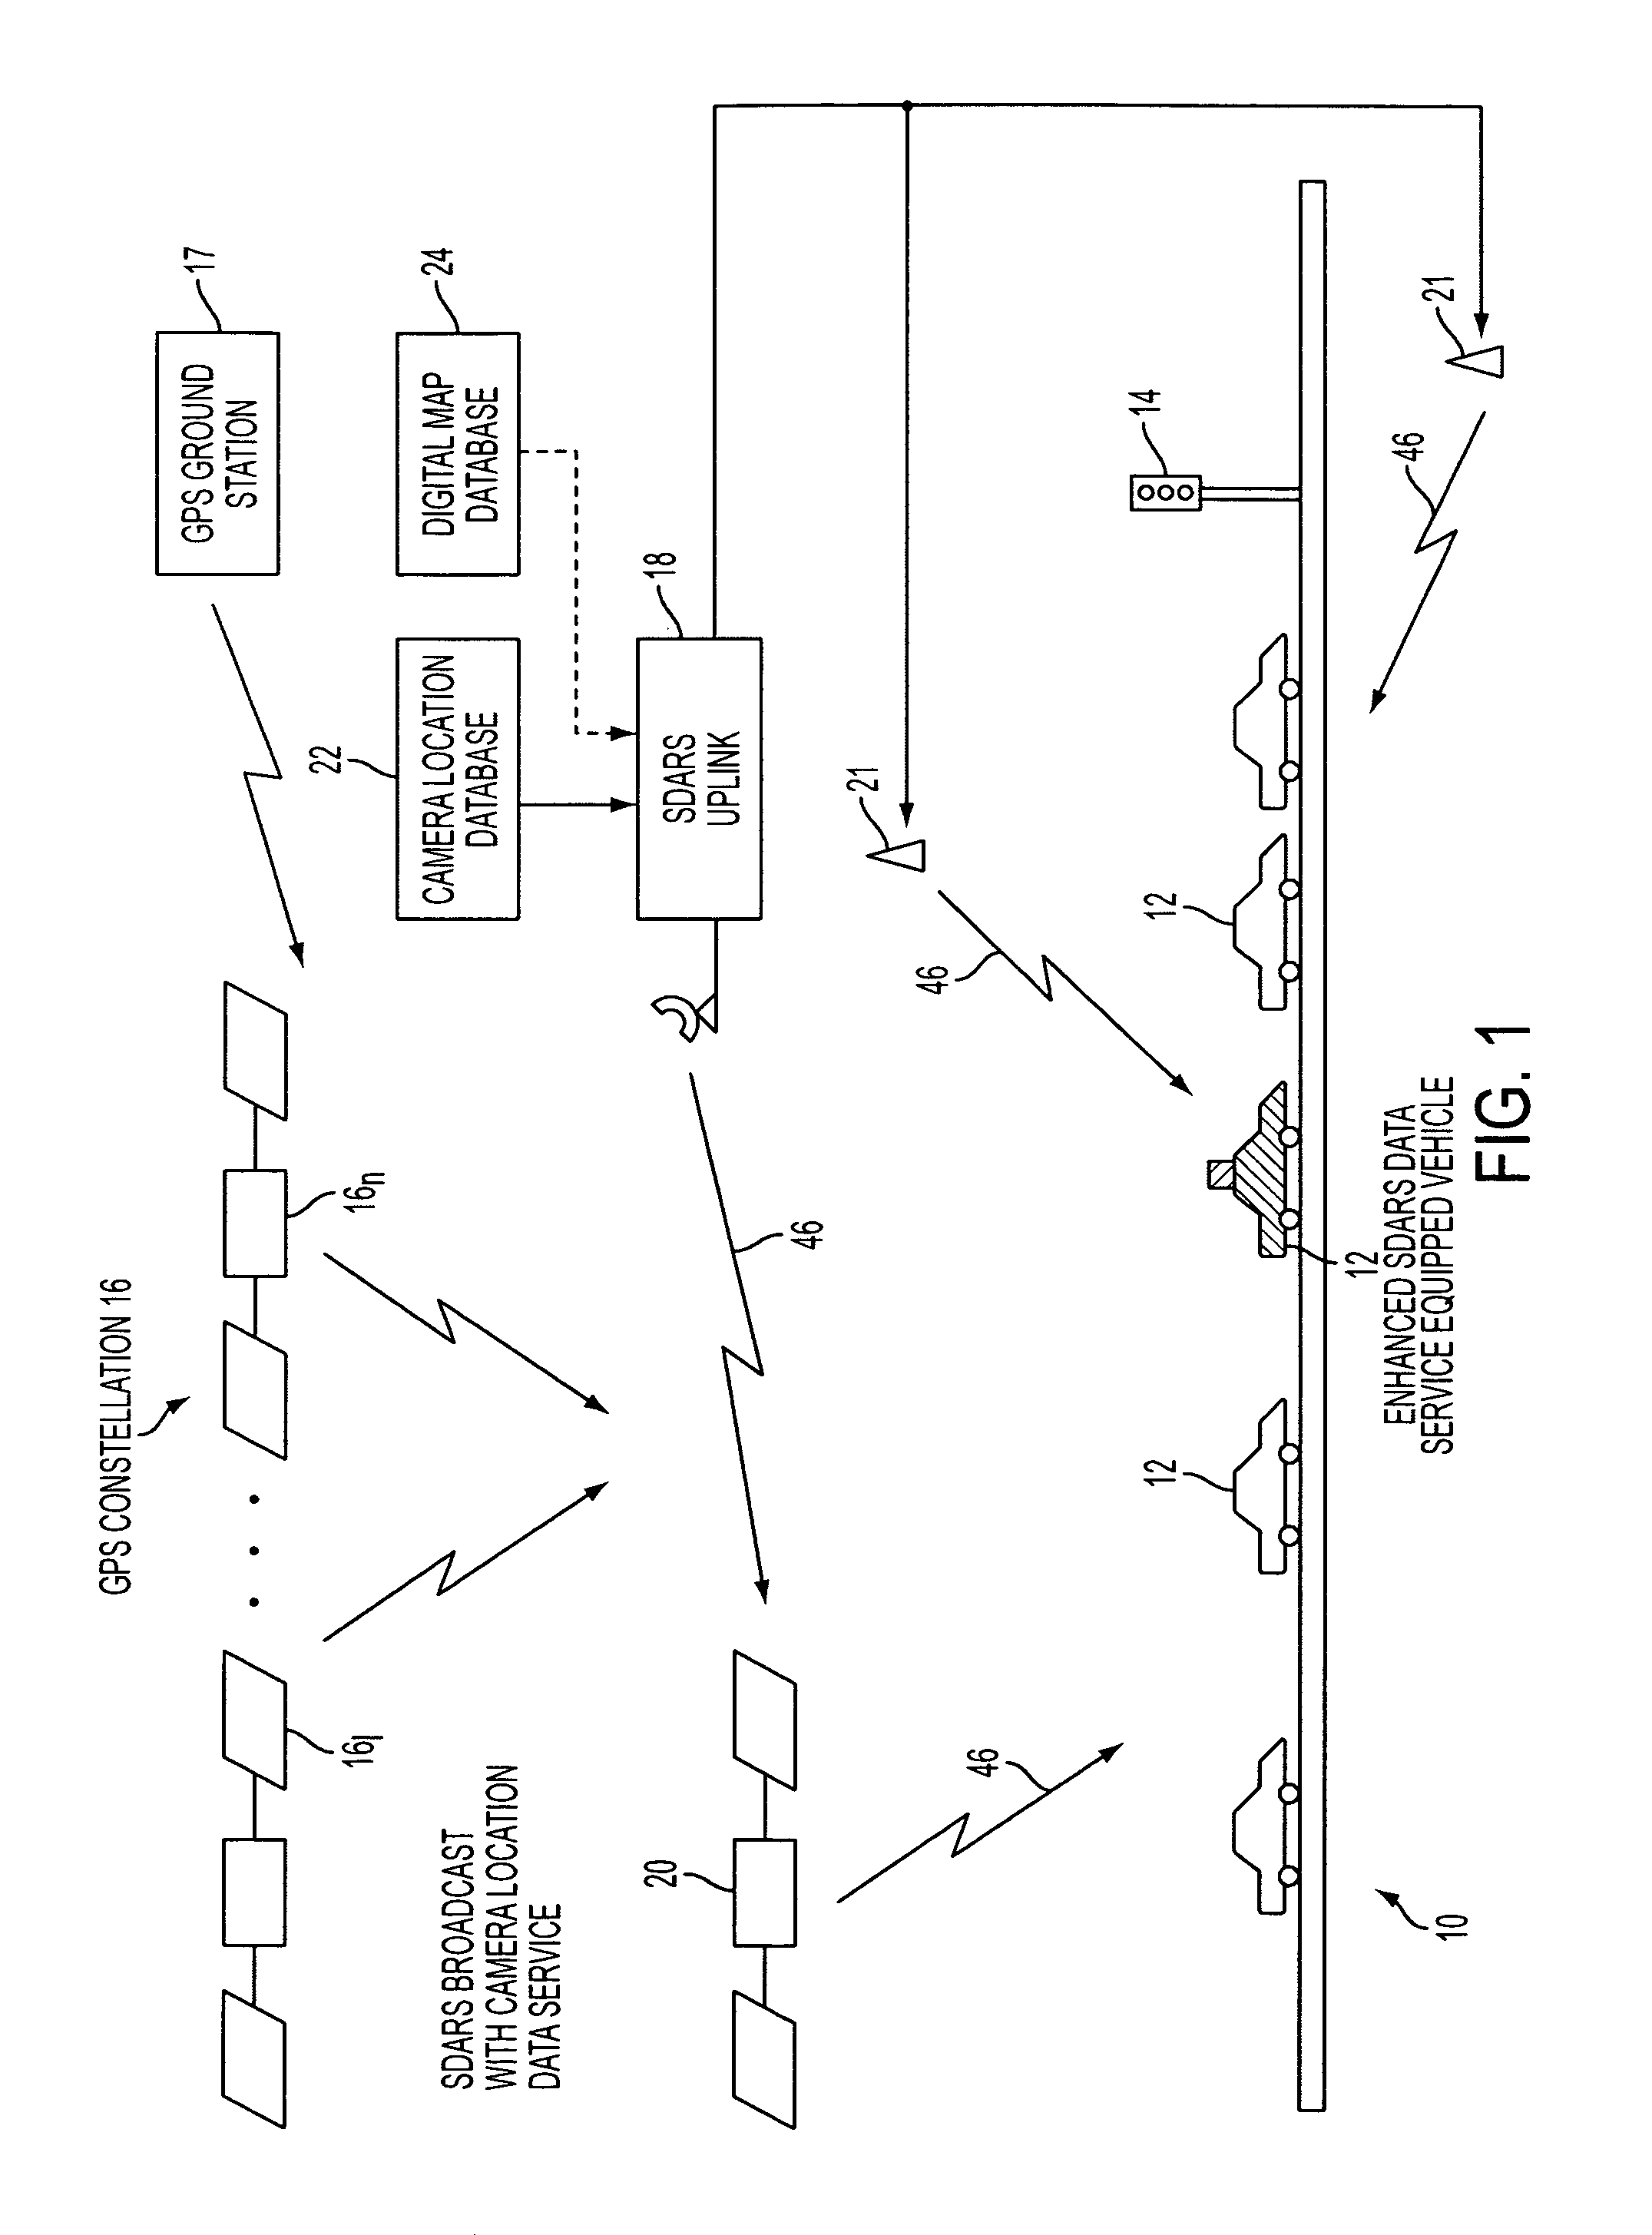 System and method for improved updating and annunciation of traffic enforcement camera information in a vehicle using a broadcast content delivery service